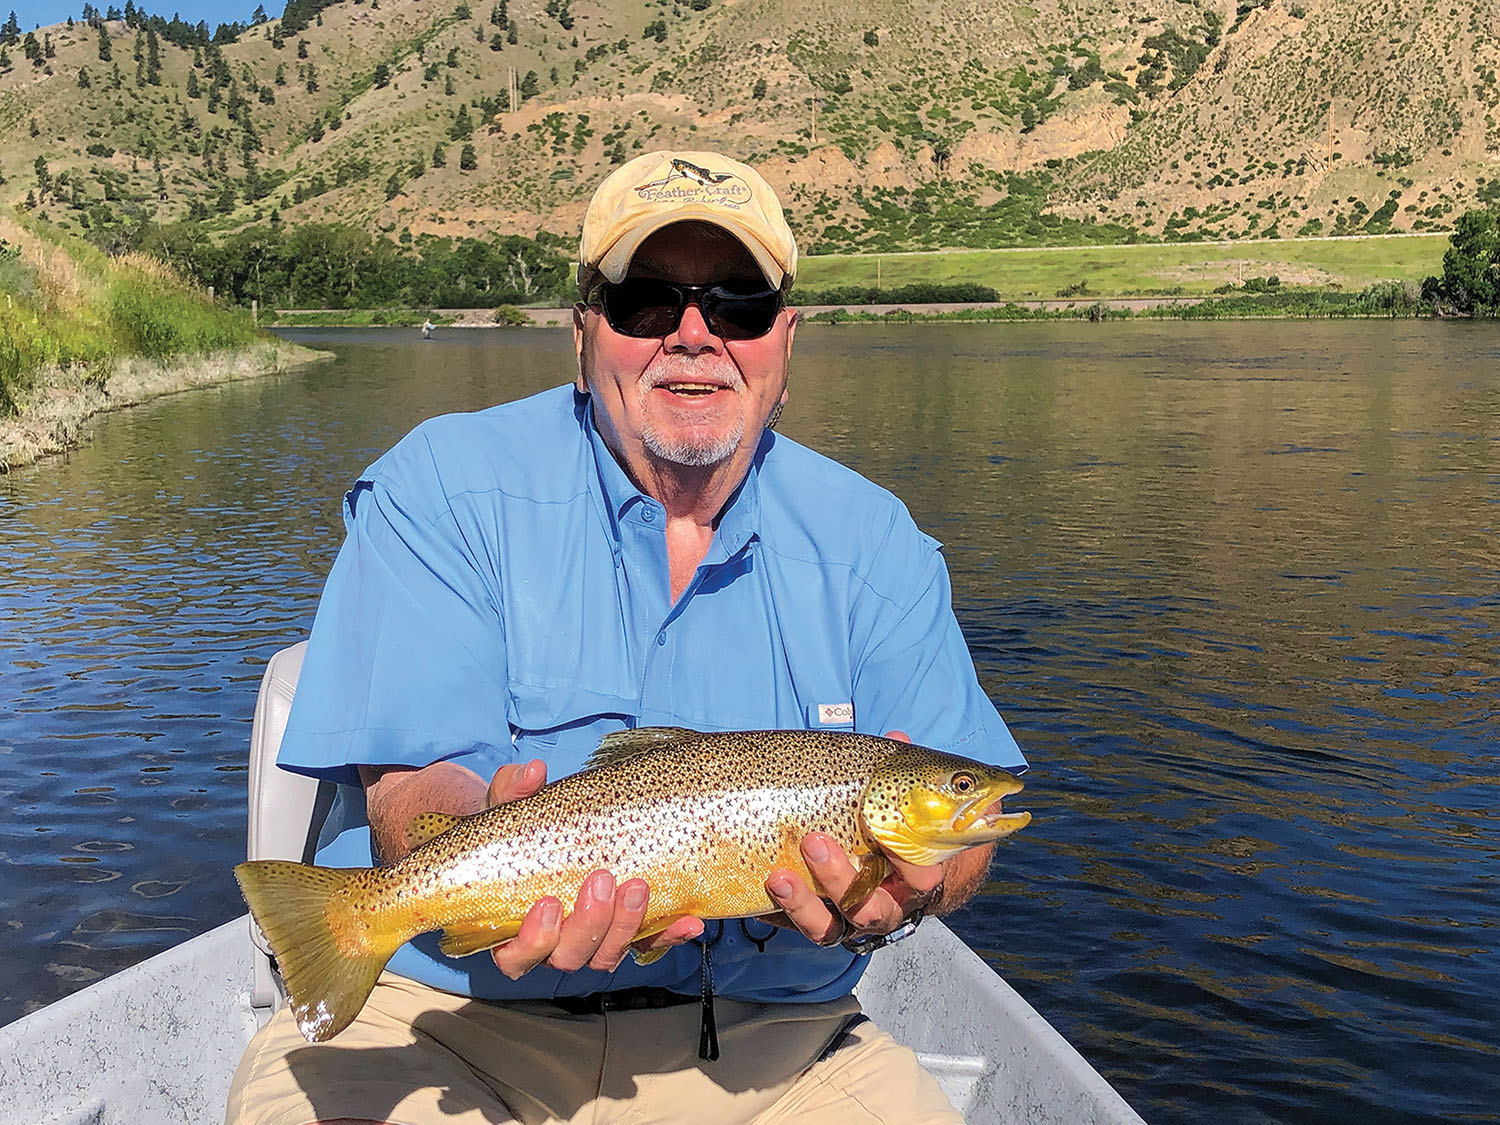 When not running the company, Foster relaxes with his favorite hobby, fly-fishing. (Photo courtesy of JB Marine Service)